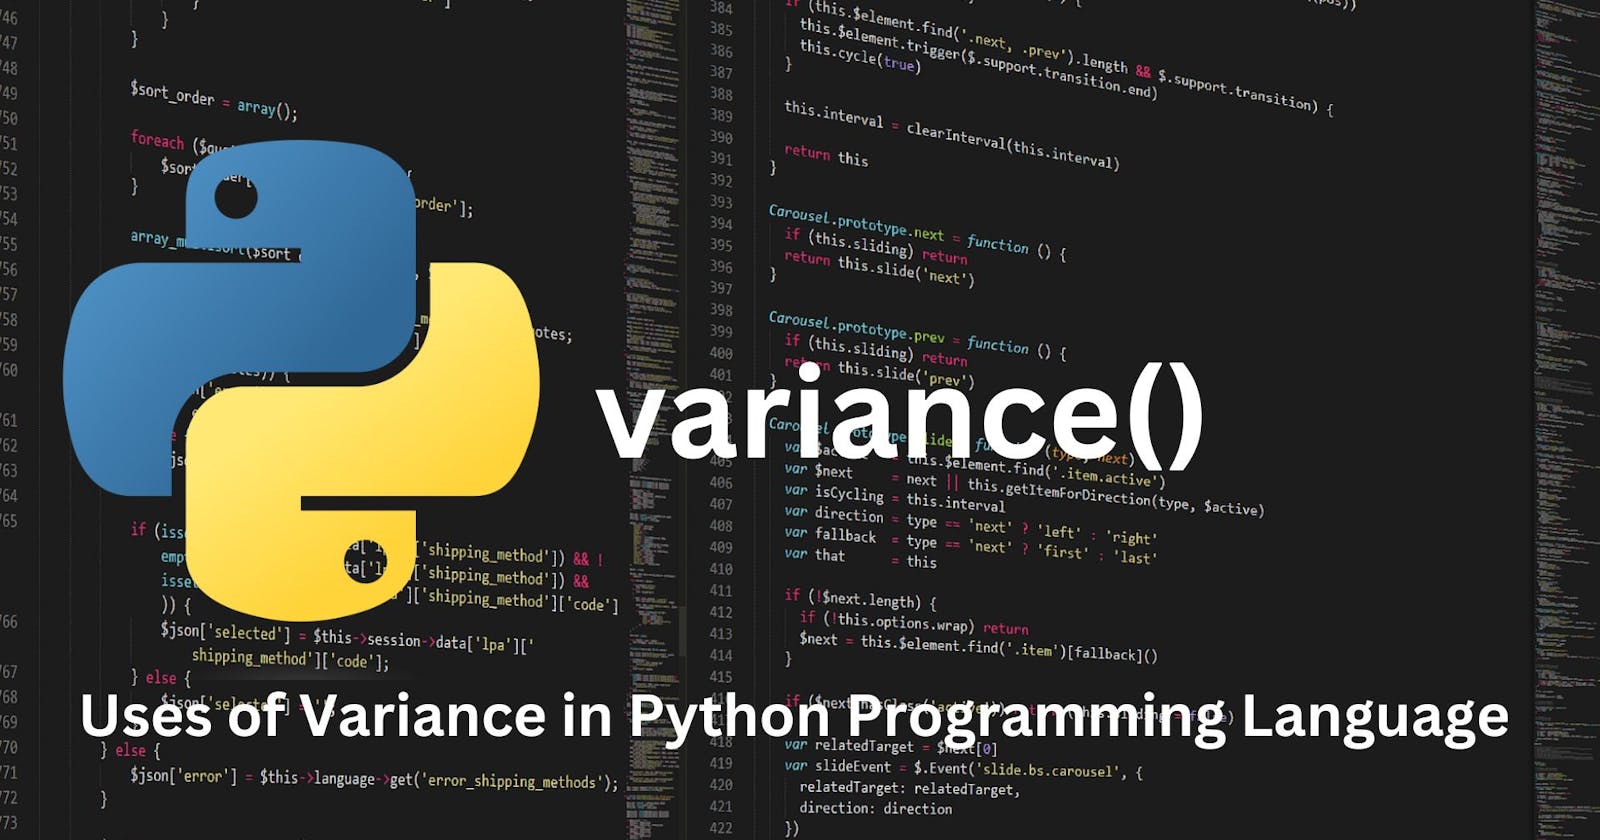 The Uses of Variance in Python Programming Language